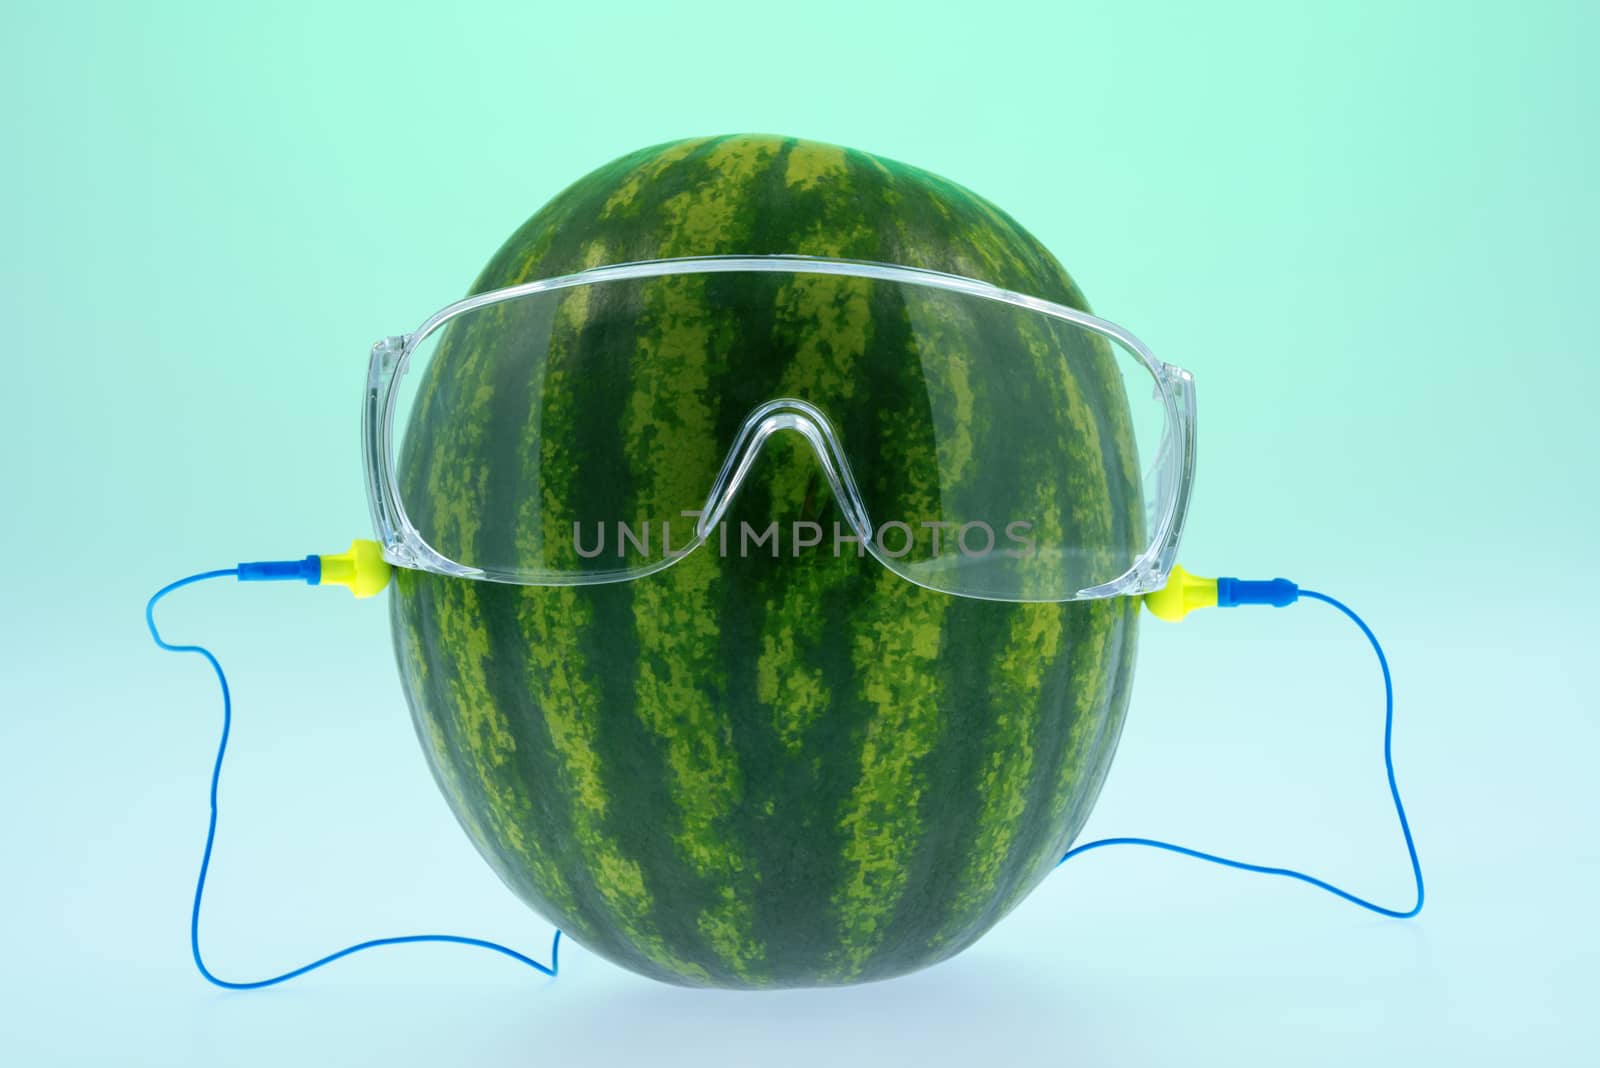 ear plugs and safety glasses on the melon by Marcus